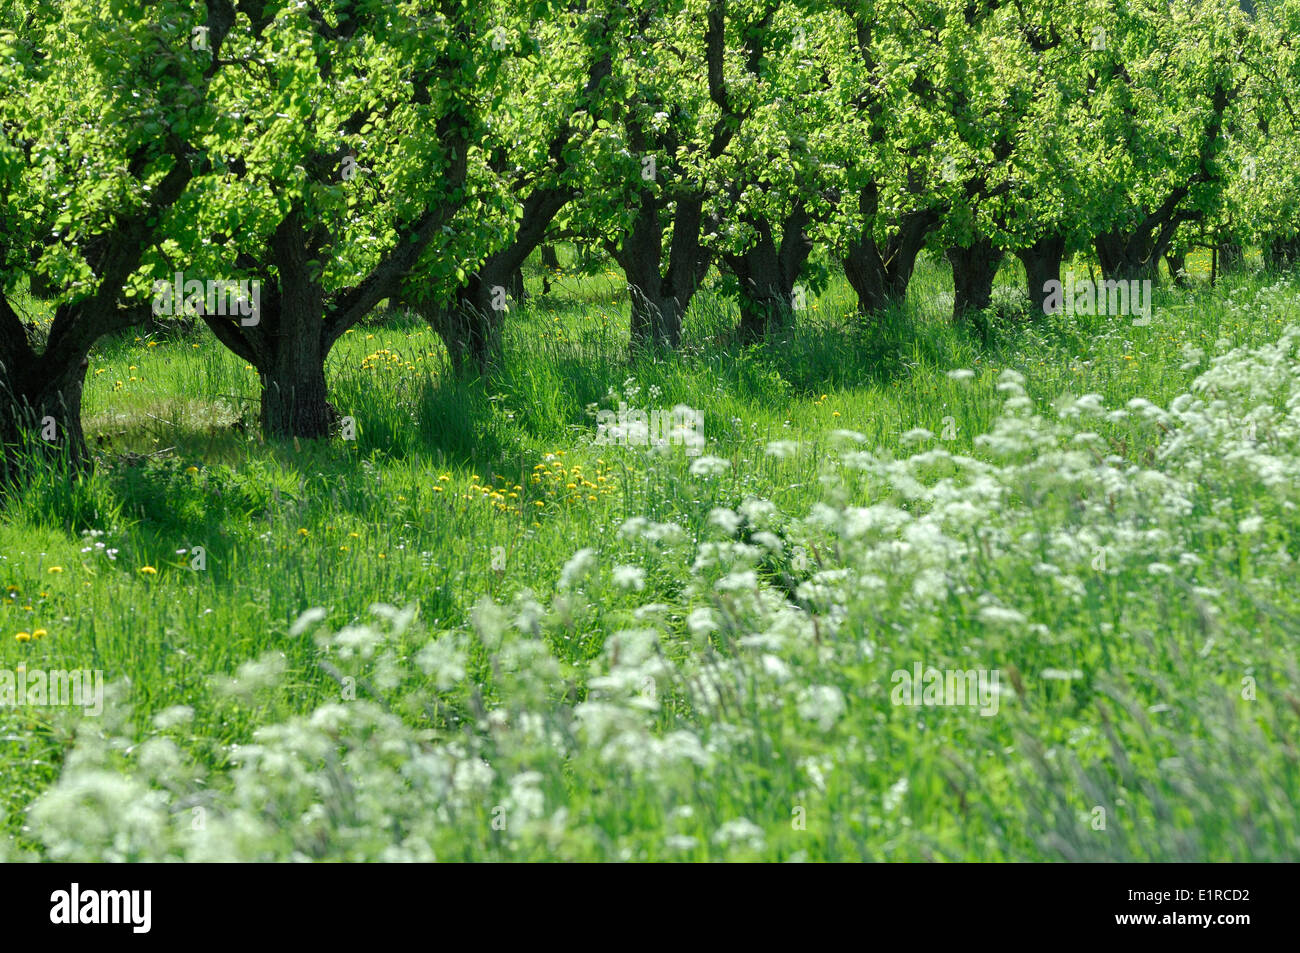 Row of Pear trees with young springtime leaves Stock Photo